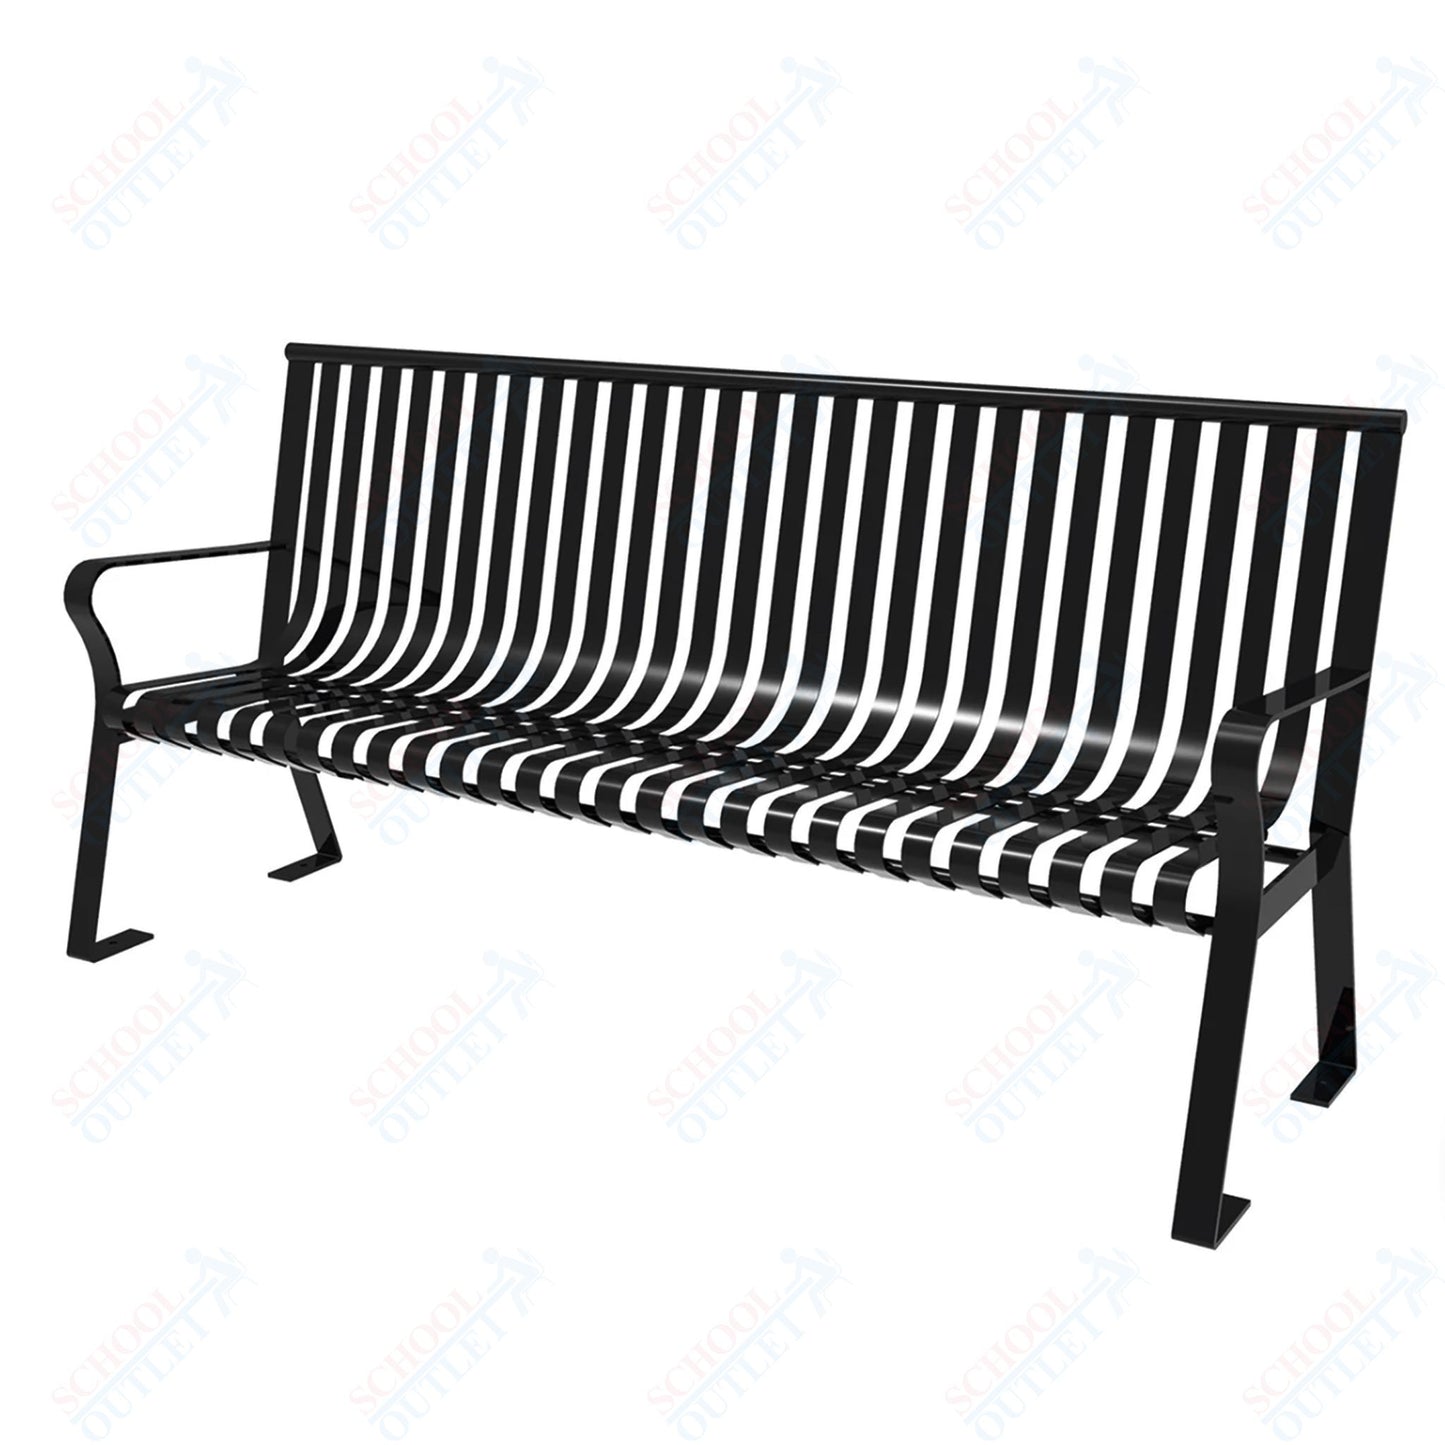 MyTcoat - Downtown Outdoor Bench with Straight Back - Strap Metal - Portable or Surface Mount 6' L (MYT-BDT06-I-55)